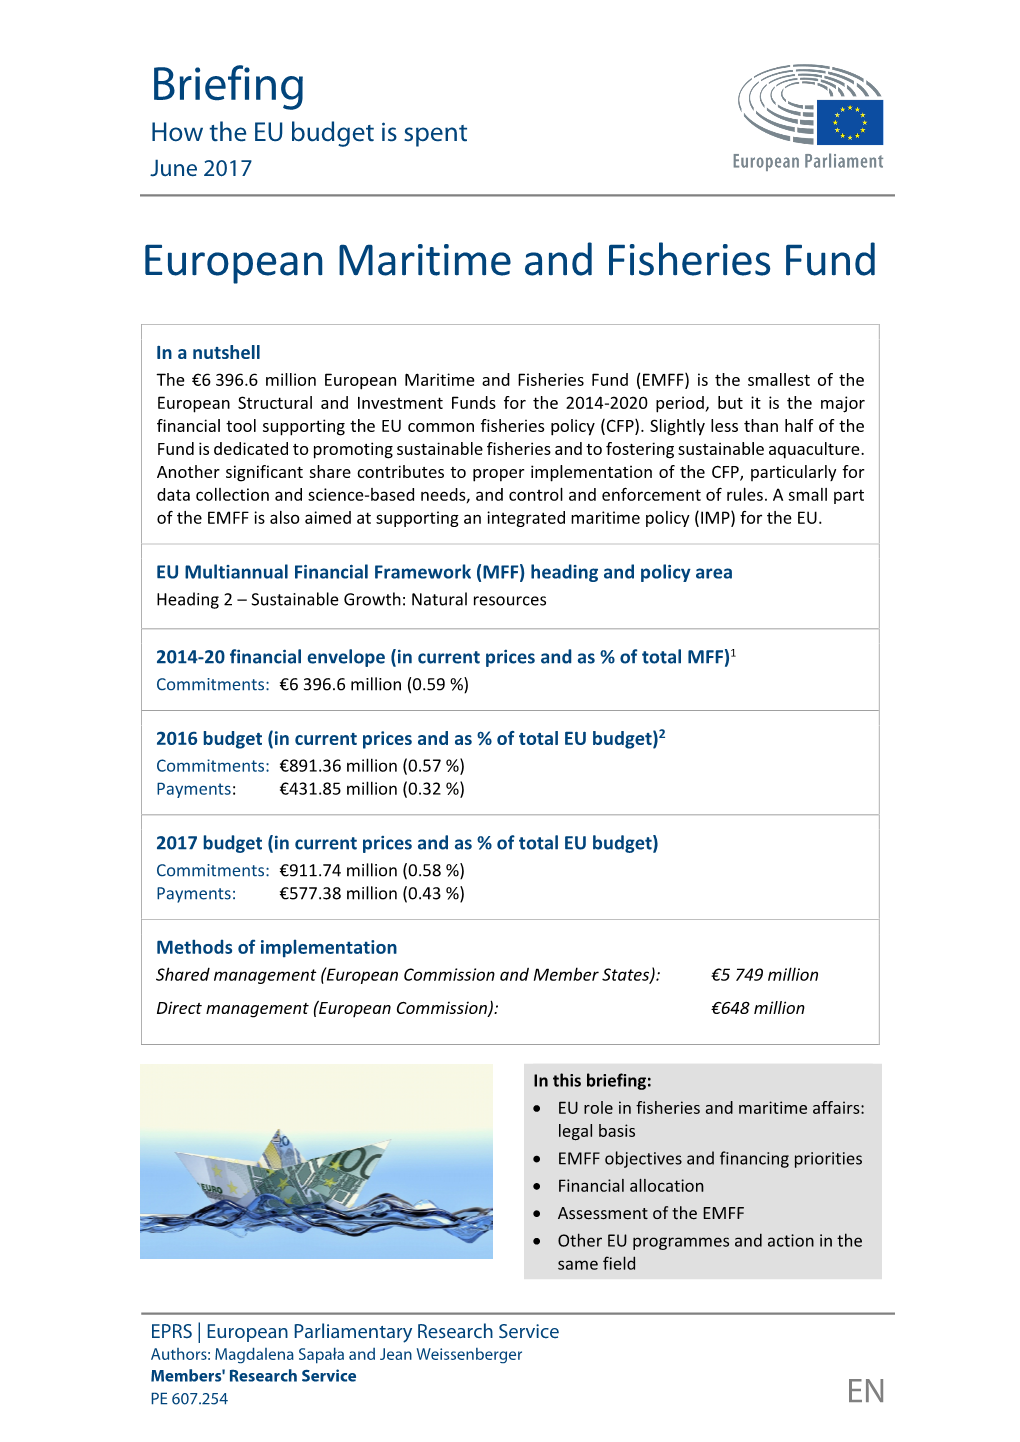 European Maritime and Fisheries Fund